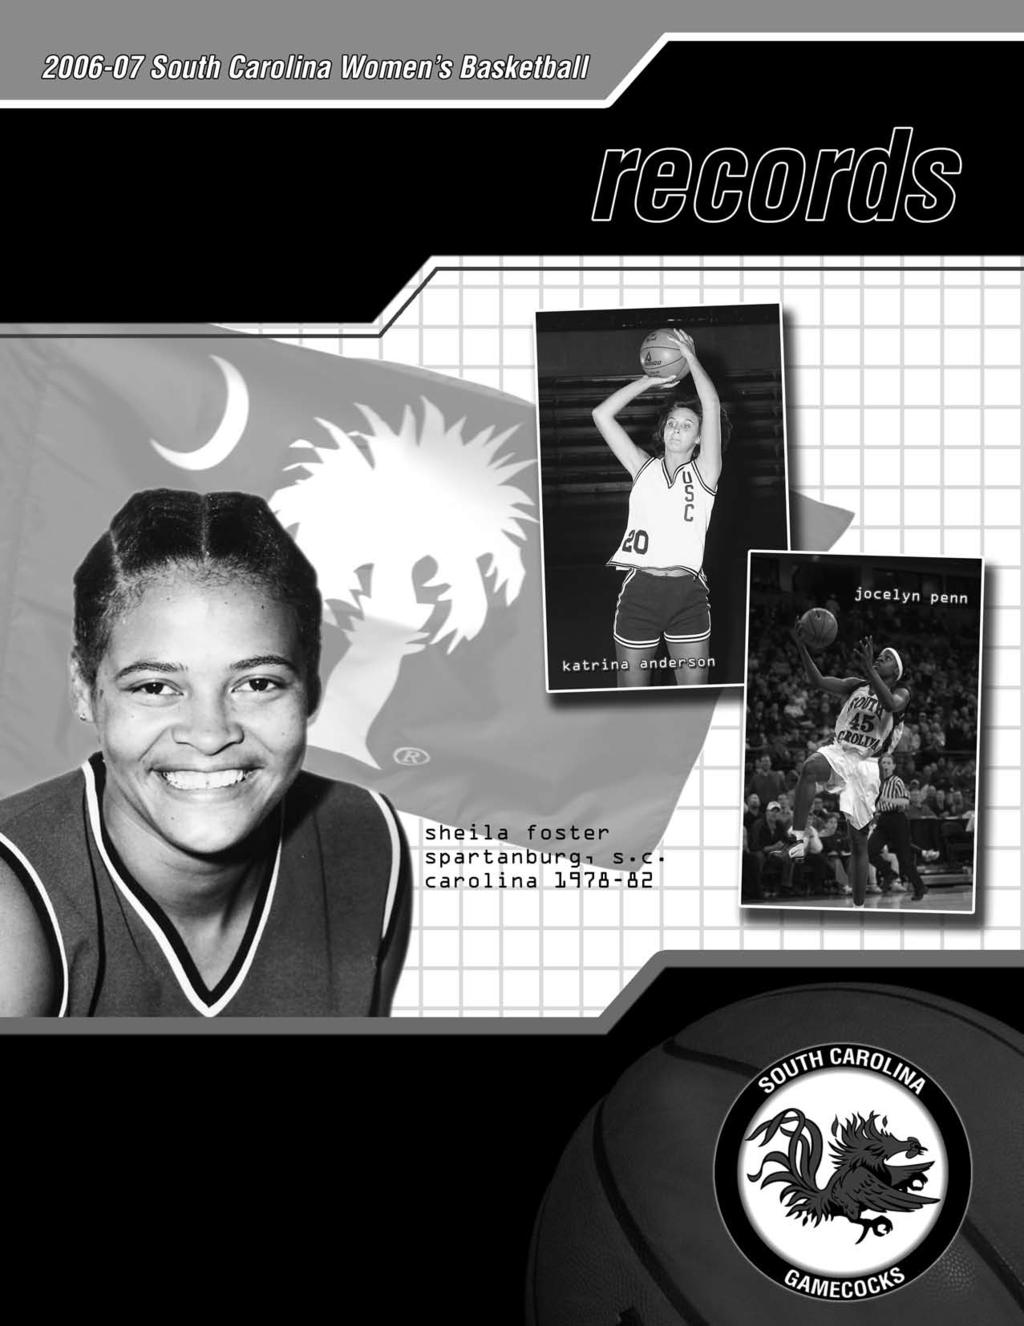 One of only three players in the history of the South Carolina women s basketball program to have her jersey retired, Sheila Foster remains Carolina s leading scorer of all time with 2,266 career